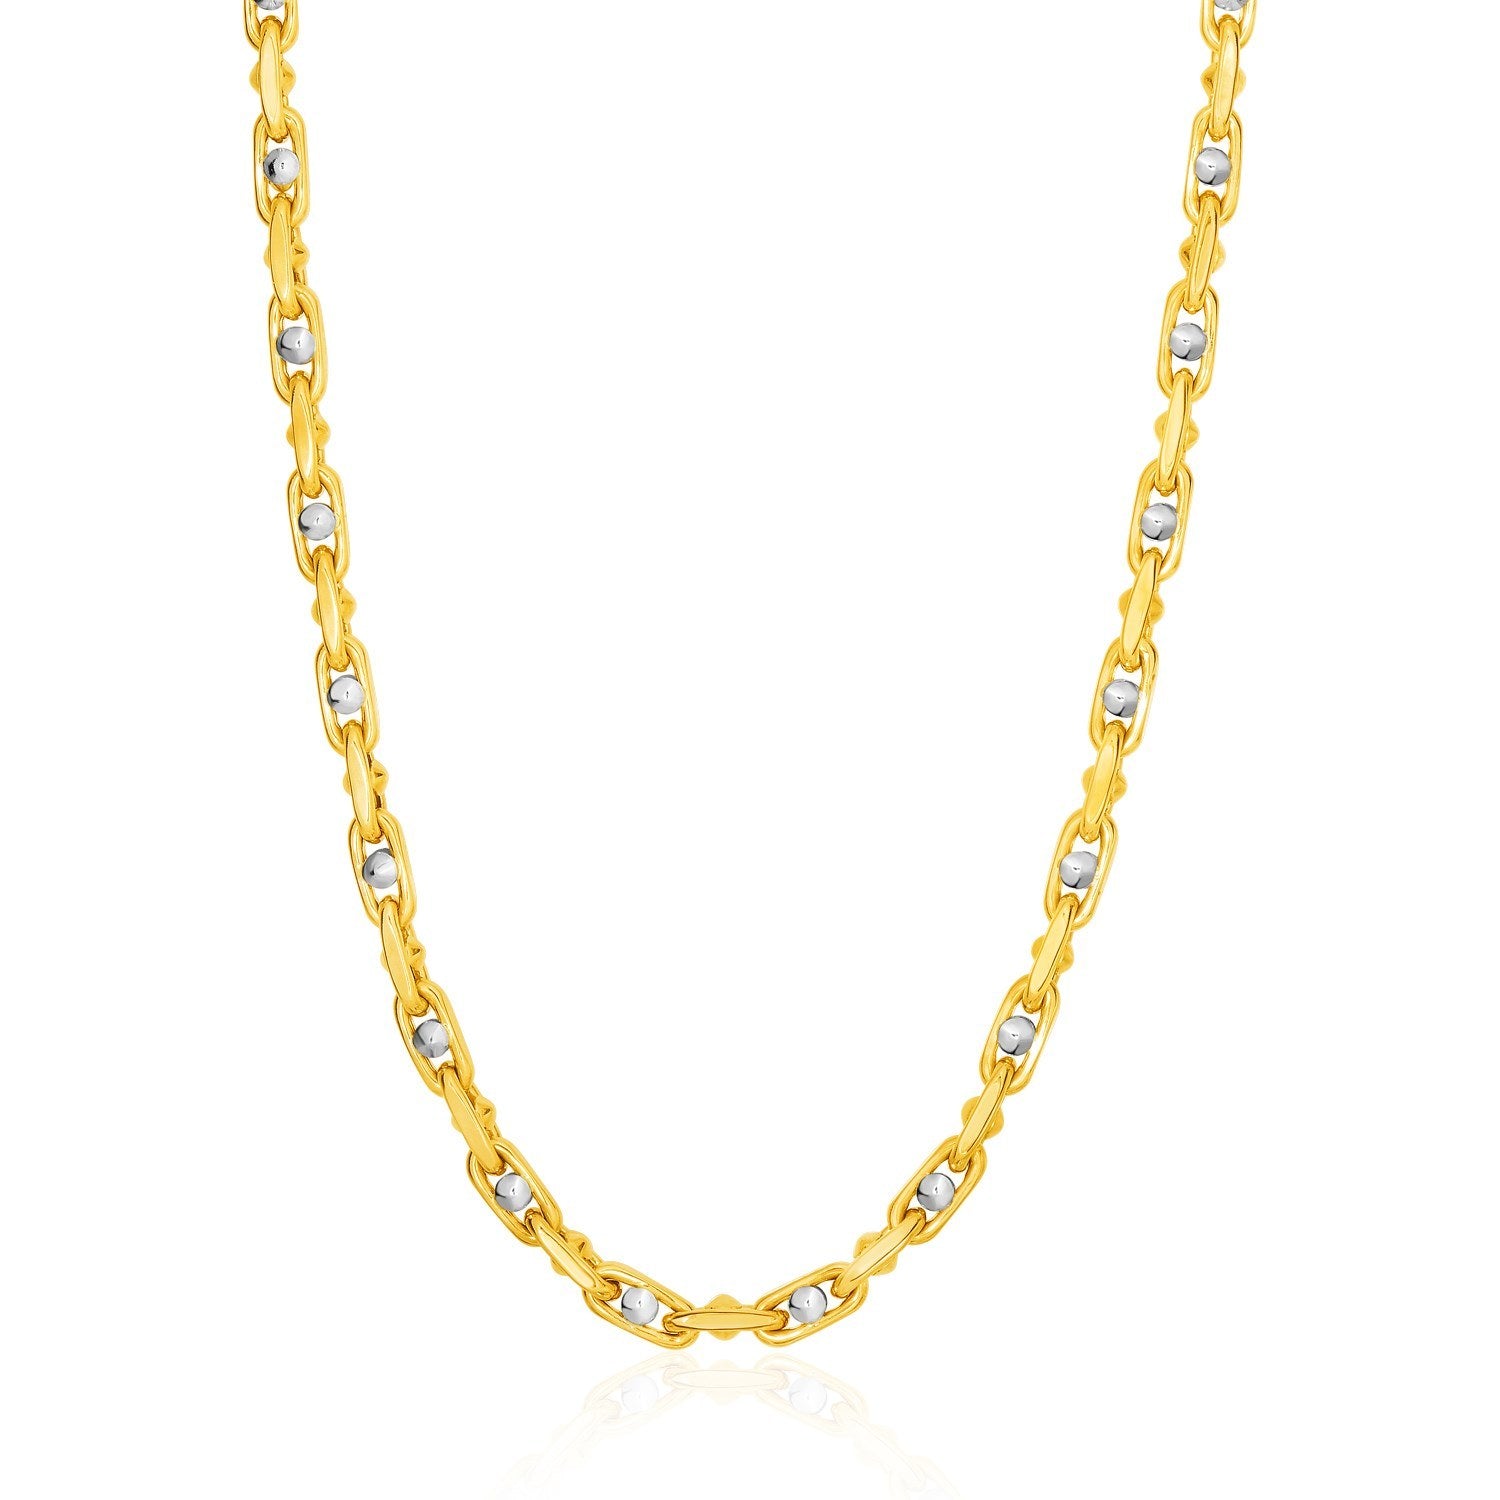 14k Two-Toned Yellow and White Gold Link Men's Necklace with Beads, front 